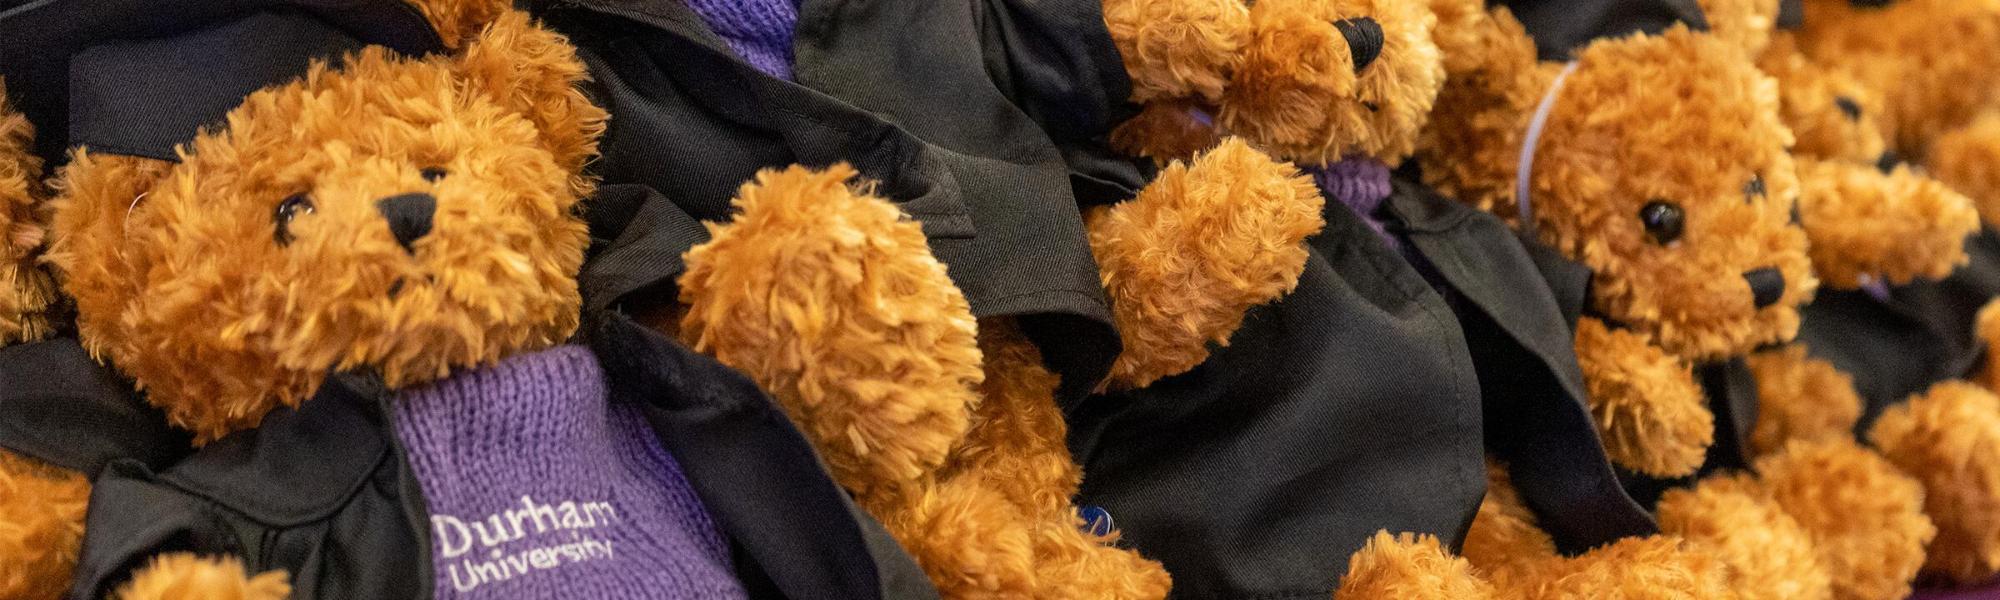 Teddies dressed up in purple jumpers and graduation robes